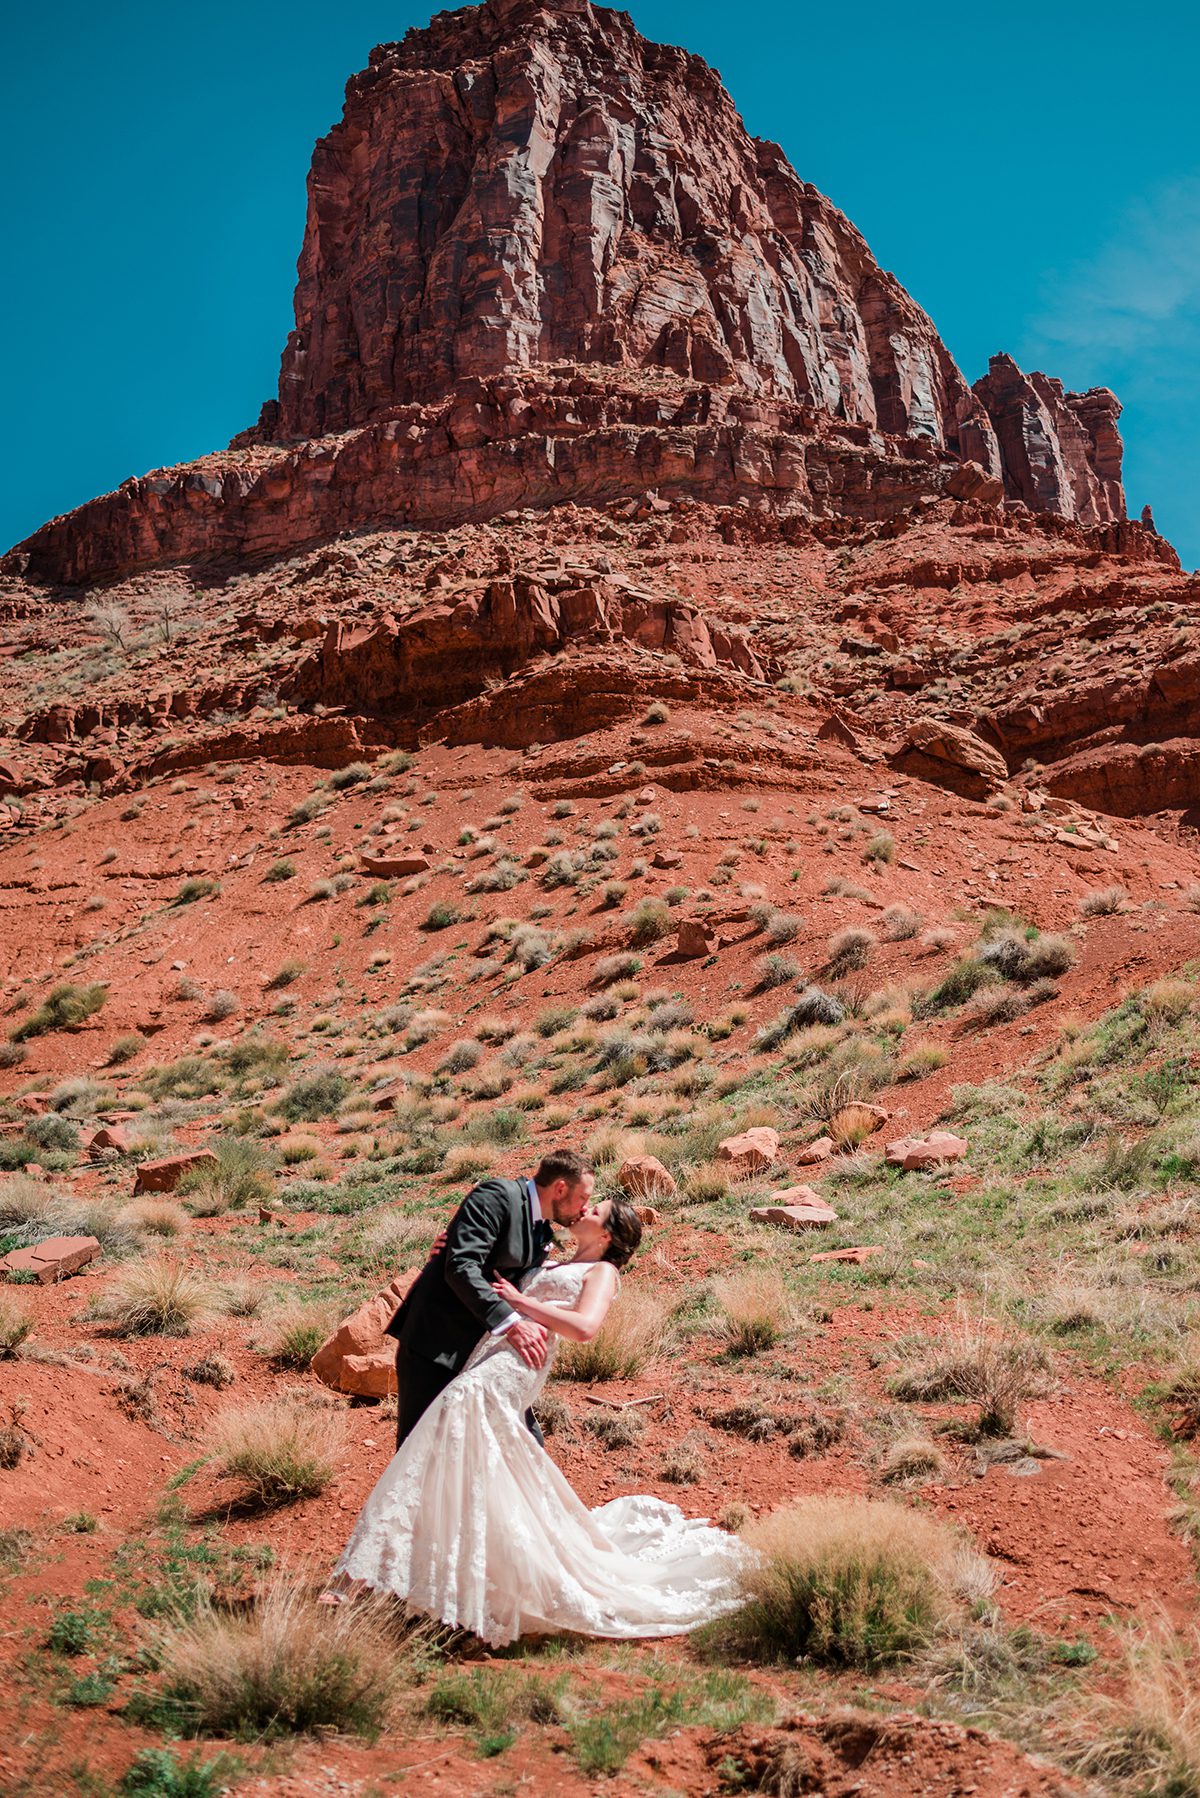 Mallory & Chris | Married on a Boat in Moab